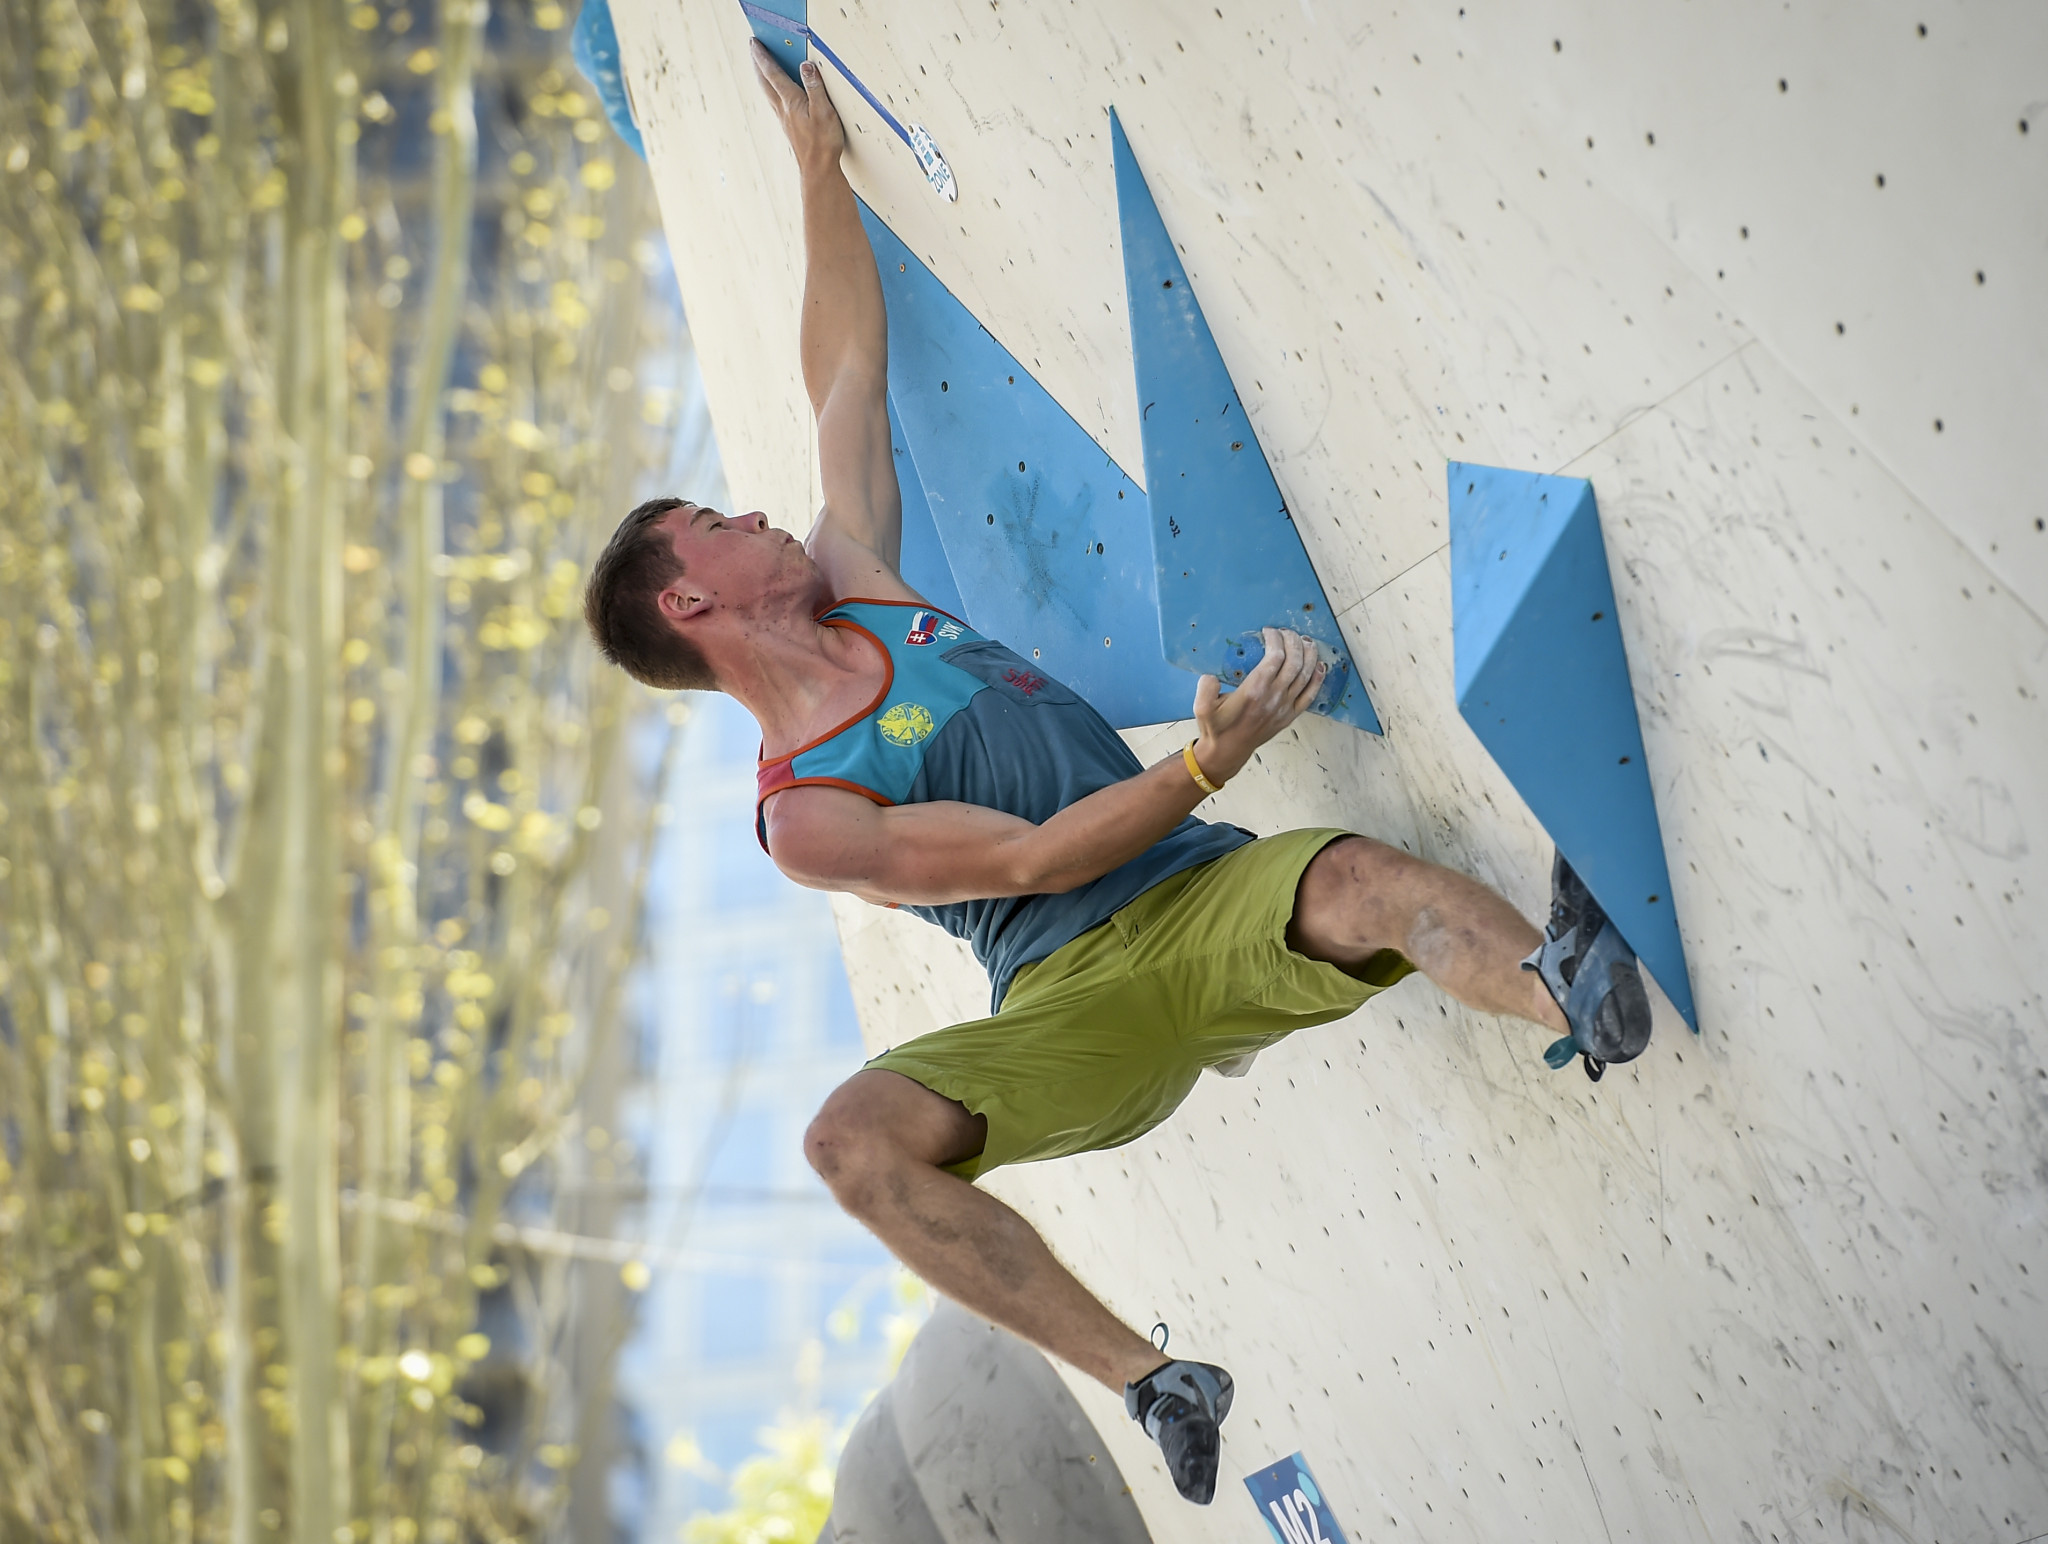 Sport climbing's medal events will double from two at Tokyo 2020 to four at Paris 2024 ©Getty Images